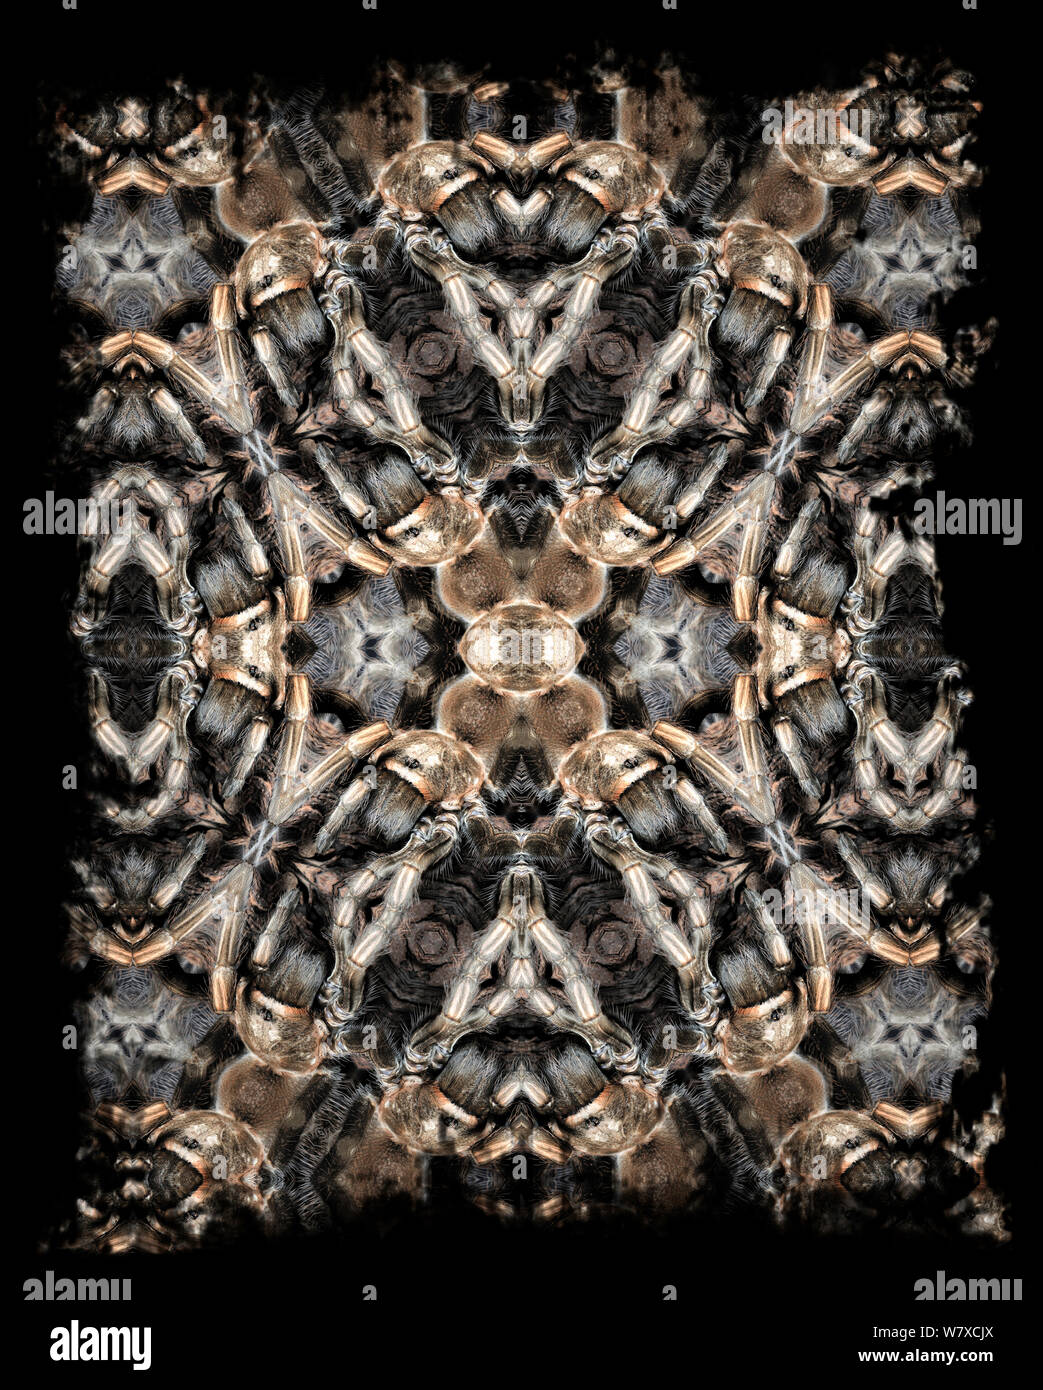 Kaleidoscope pattern formed from picture of Peruvian blonde tarantula (Lasiodora polycuspulatus) - see original image number 01482832 EMBARGOED FOR NAT GEO UNTIL the end of 2015 Stock Photo